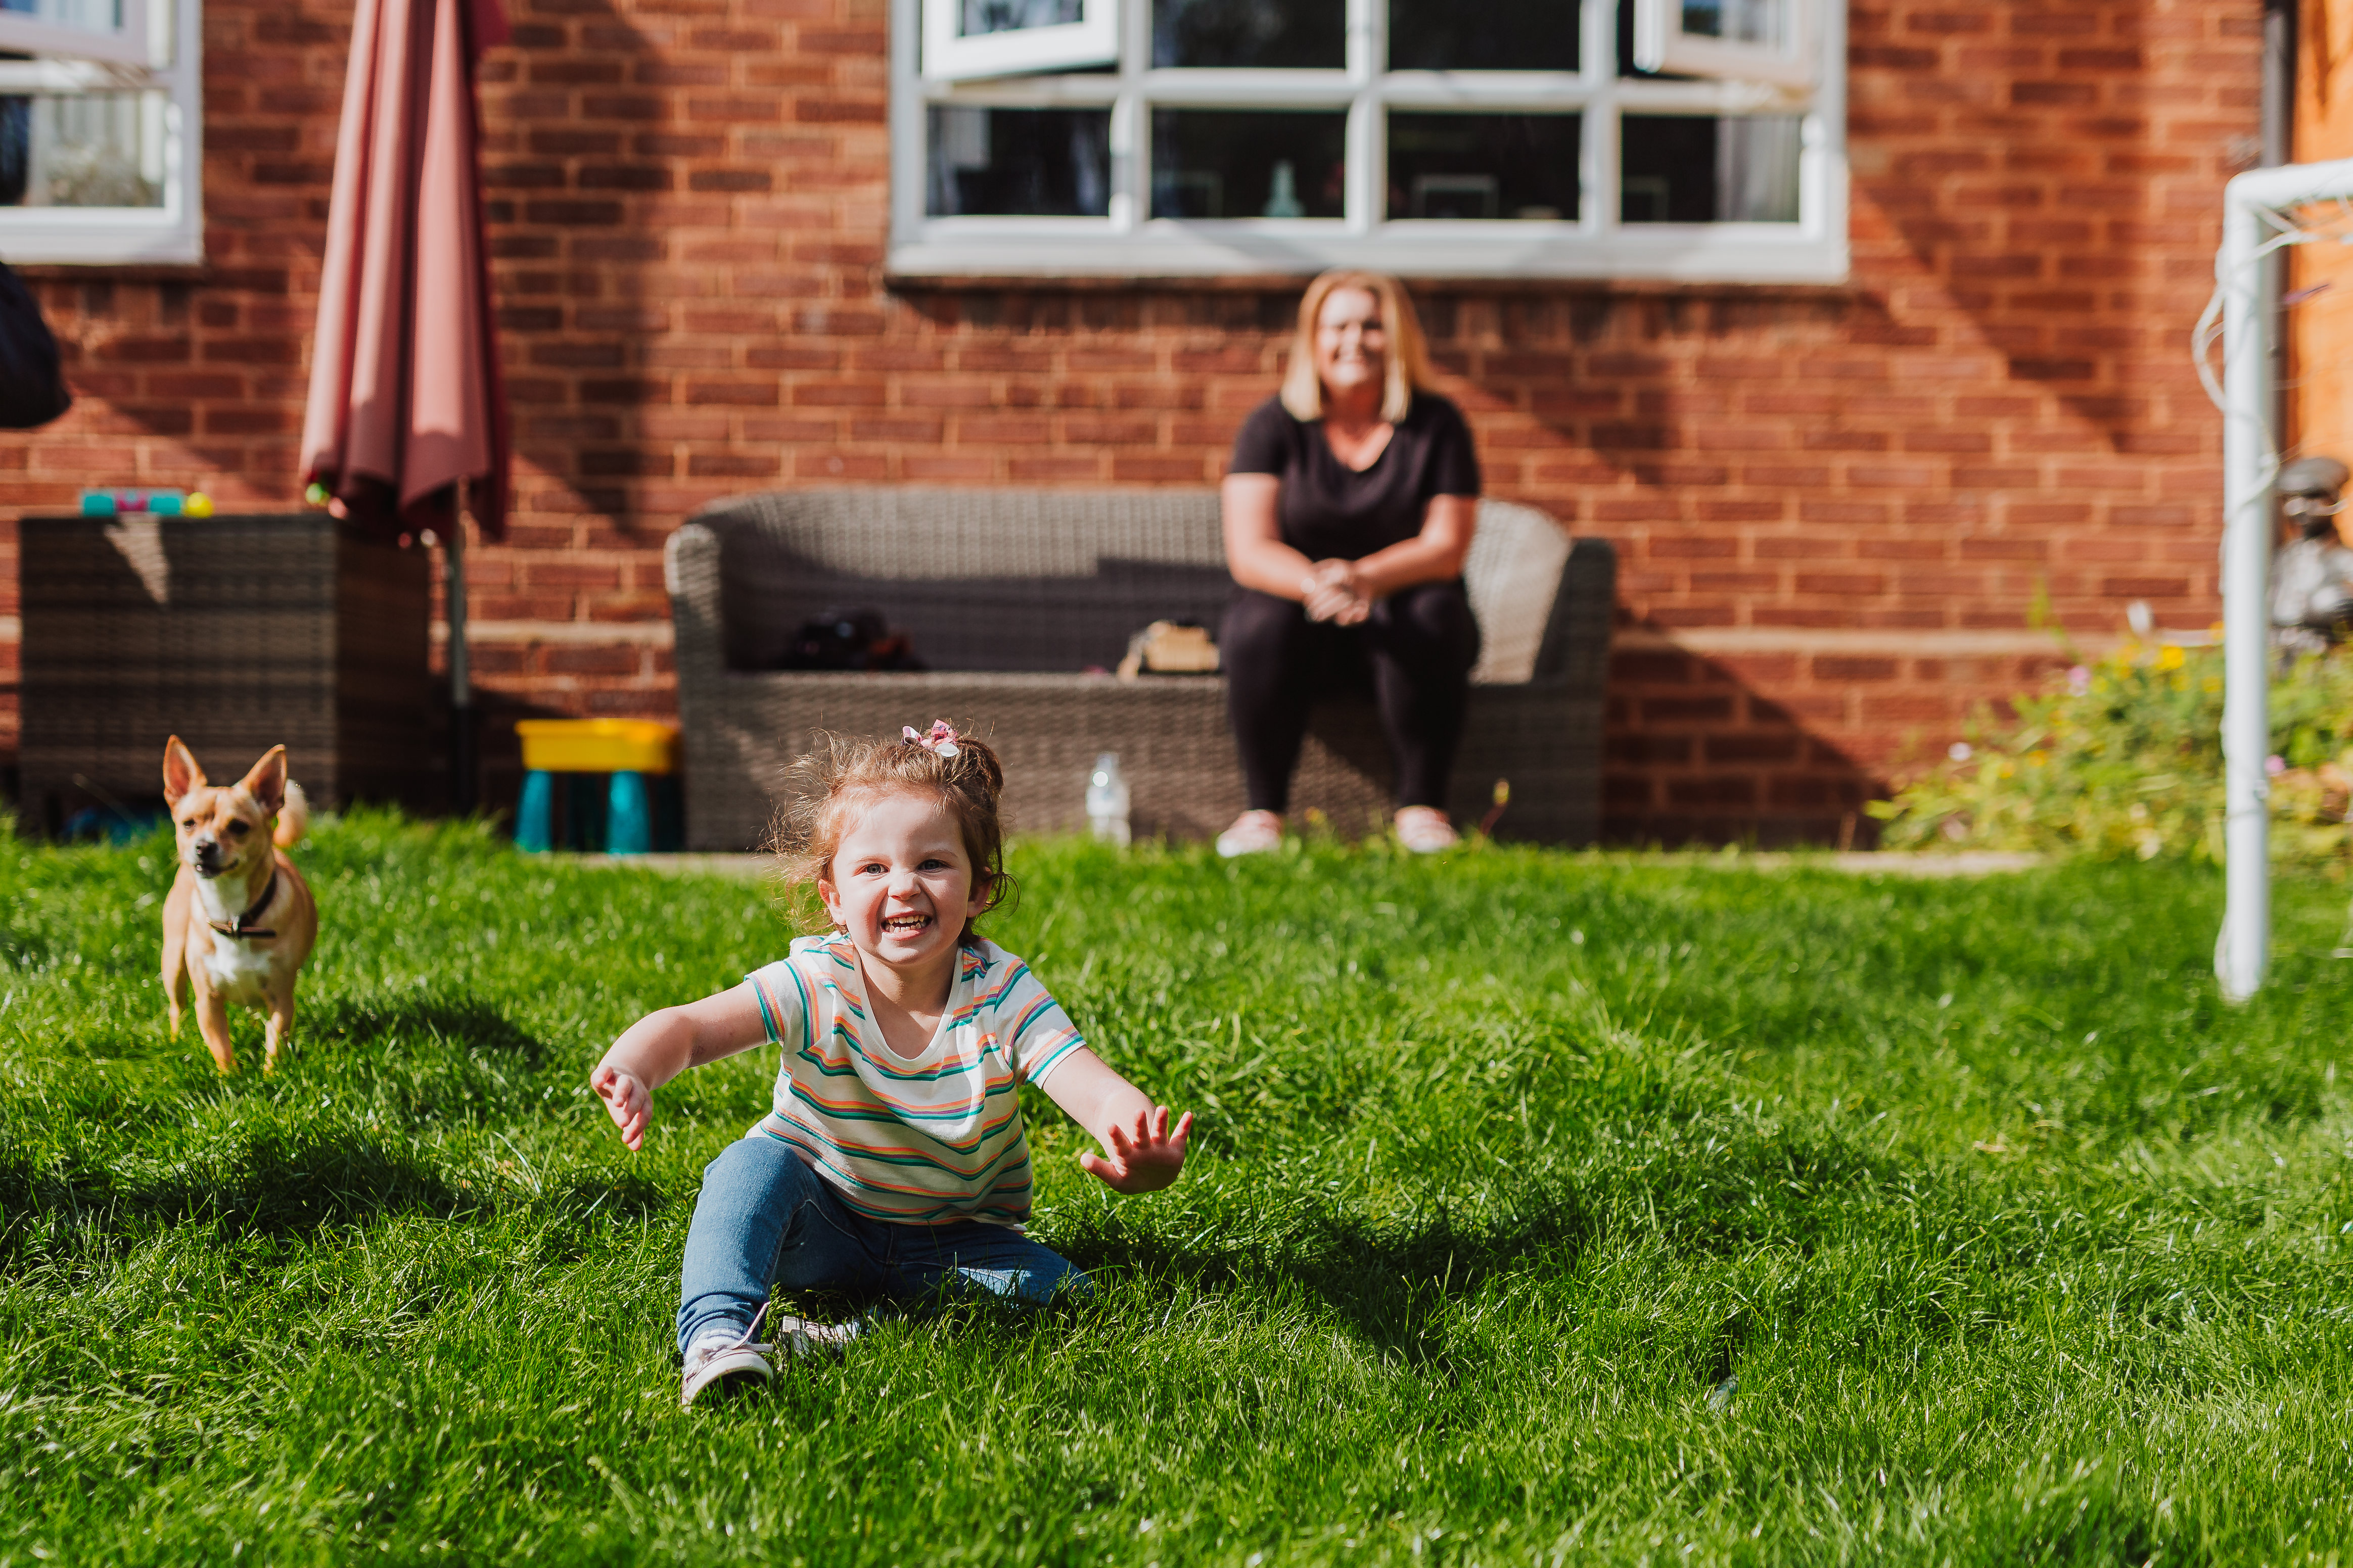 A woman sits on a bench in her garden in the distance of the image with a little girl, around 3 years old, plays on the lawn in front next to her dog